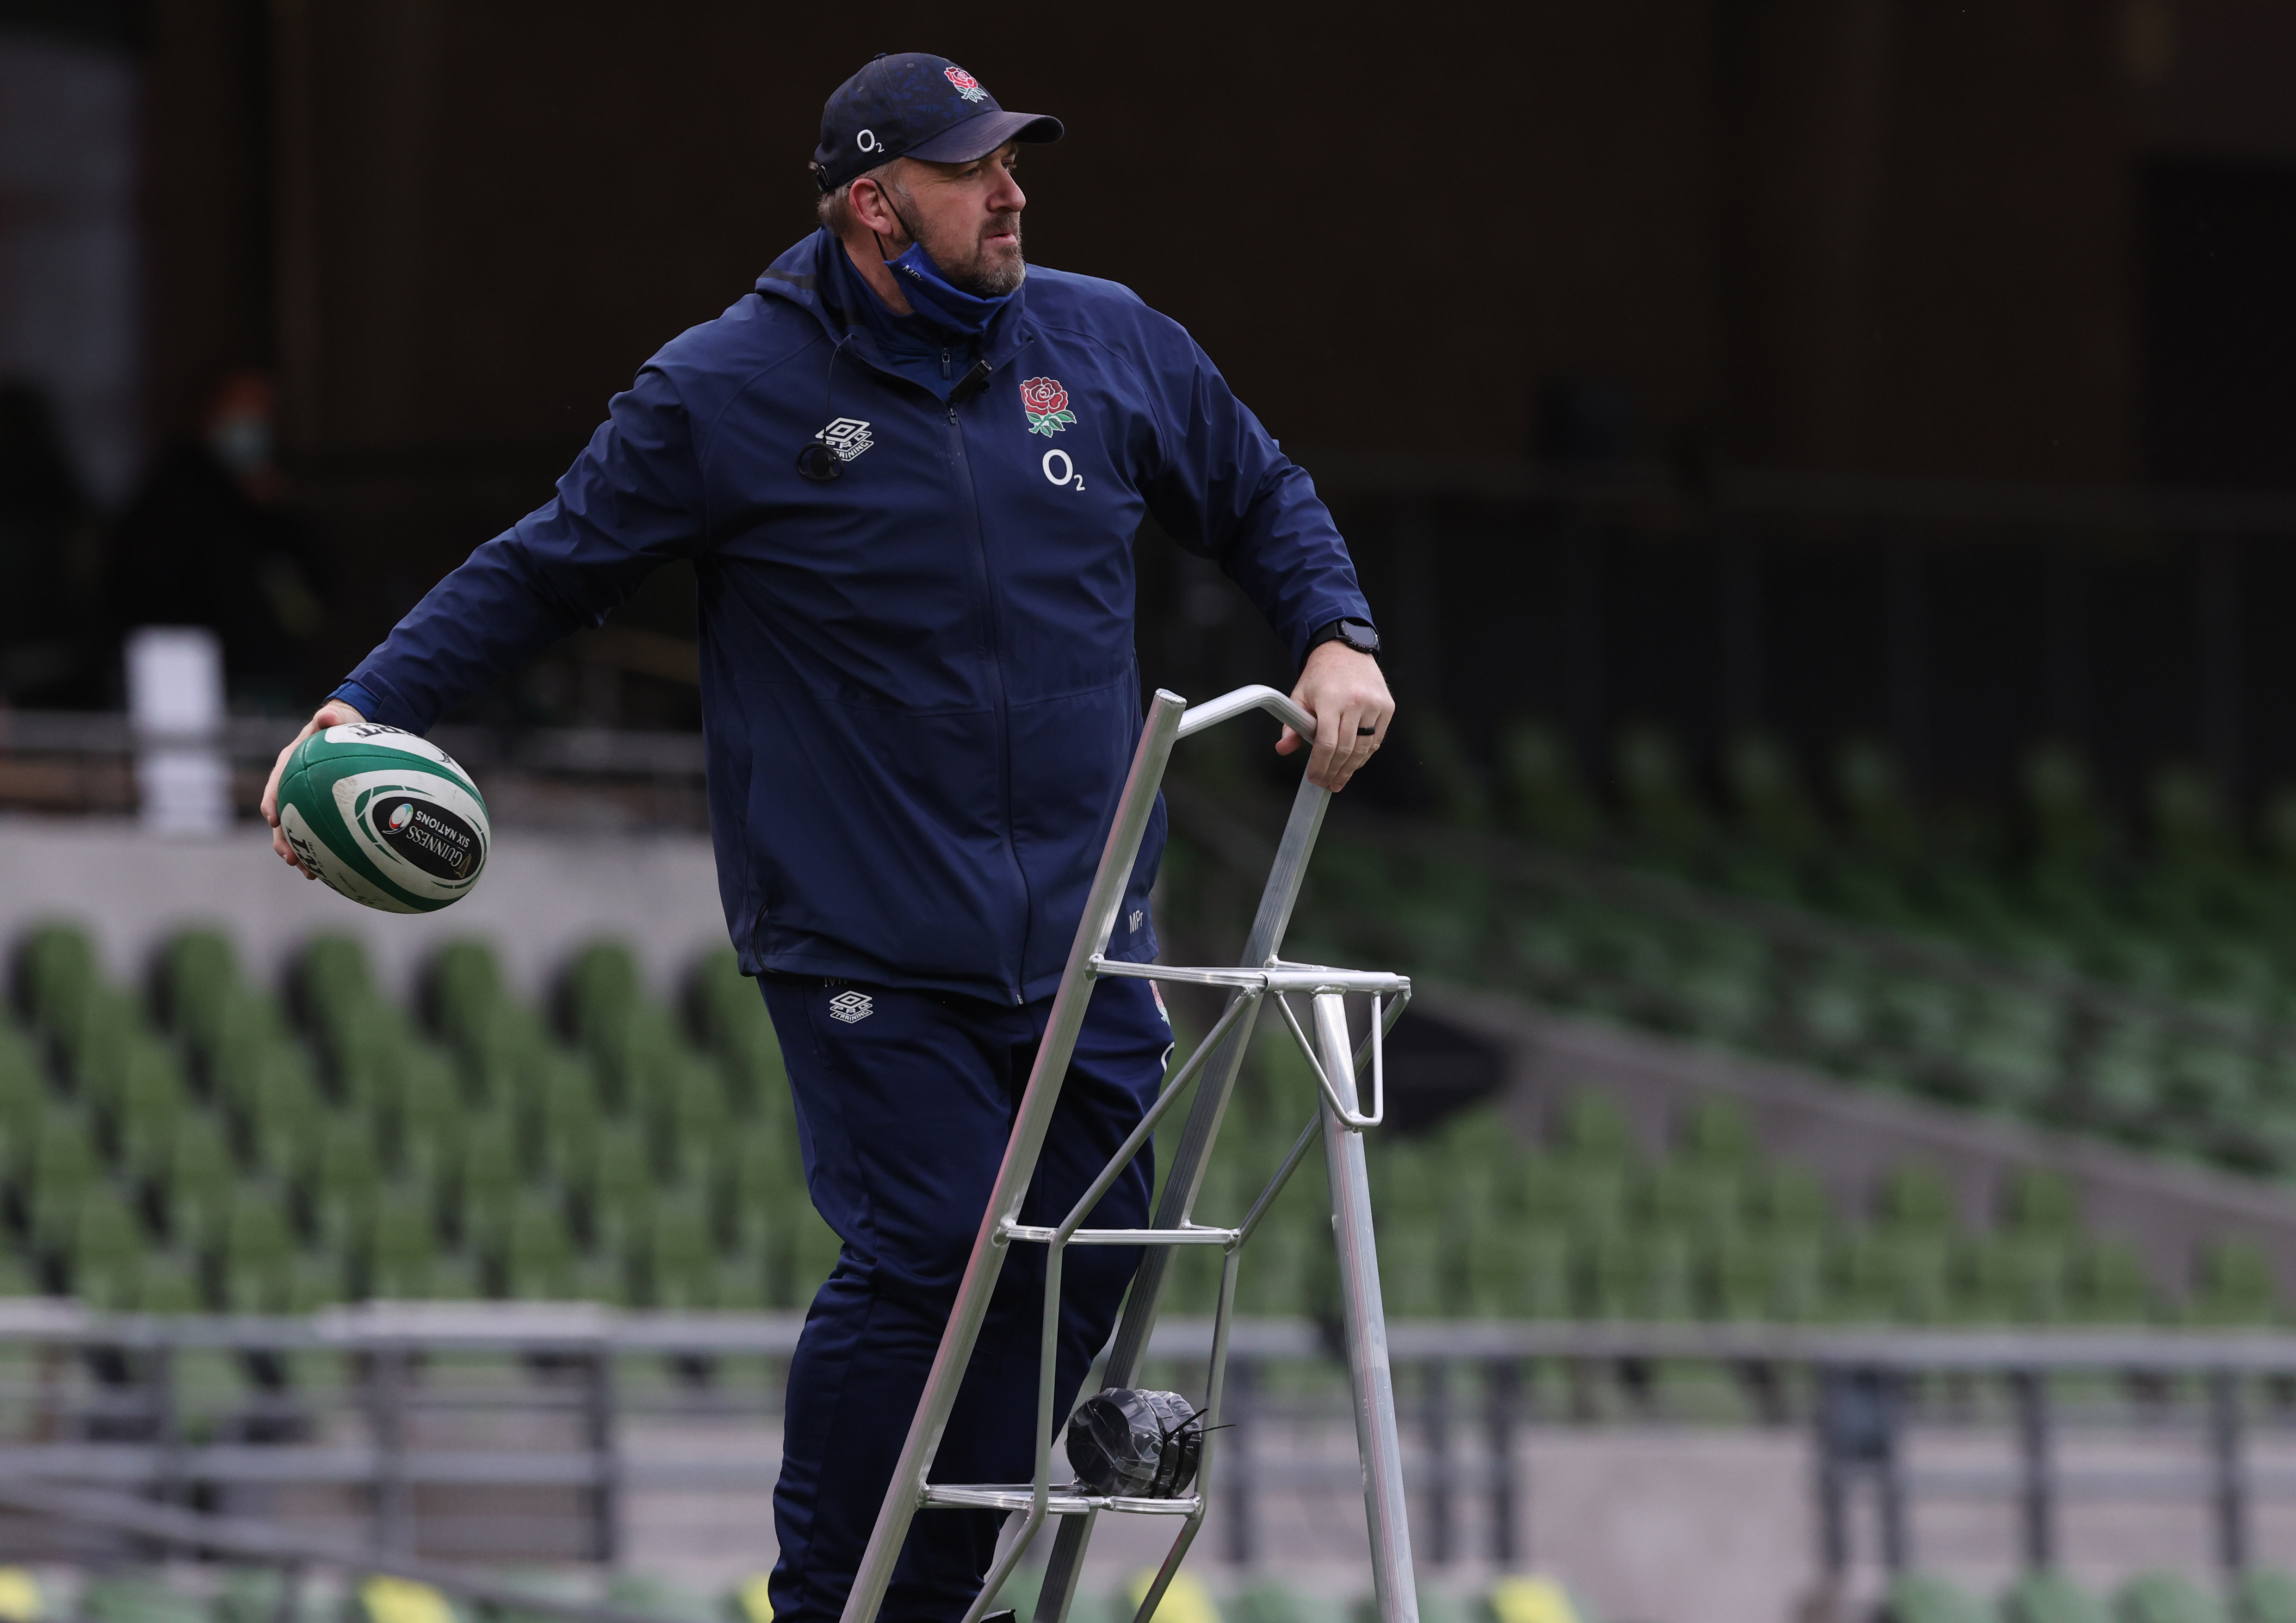 England Rugby coach standing on tripod ladder